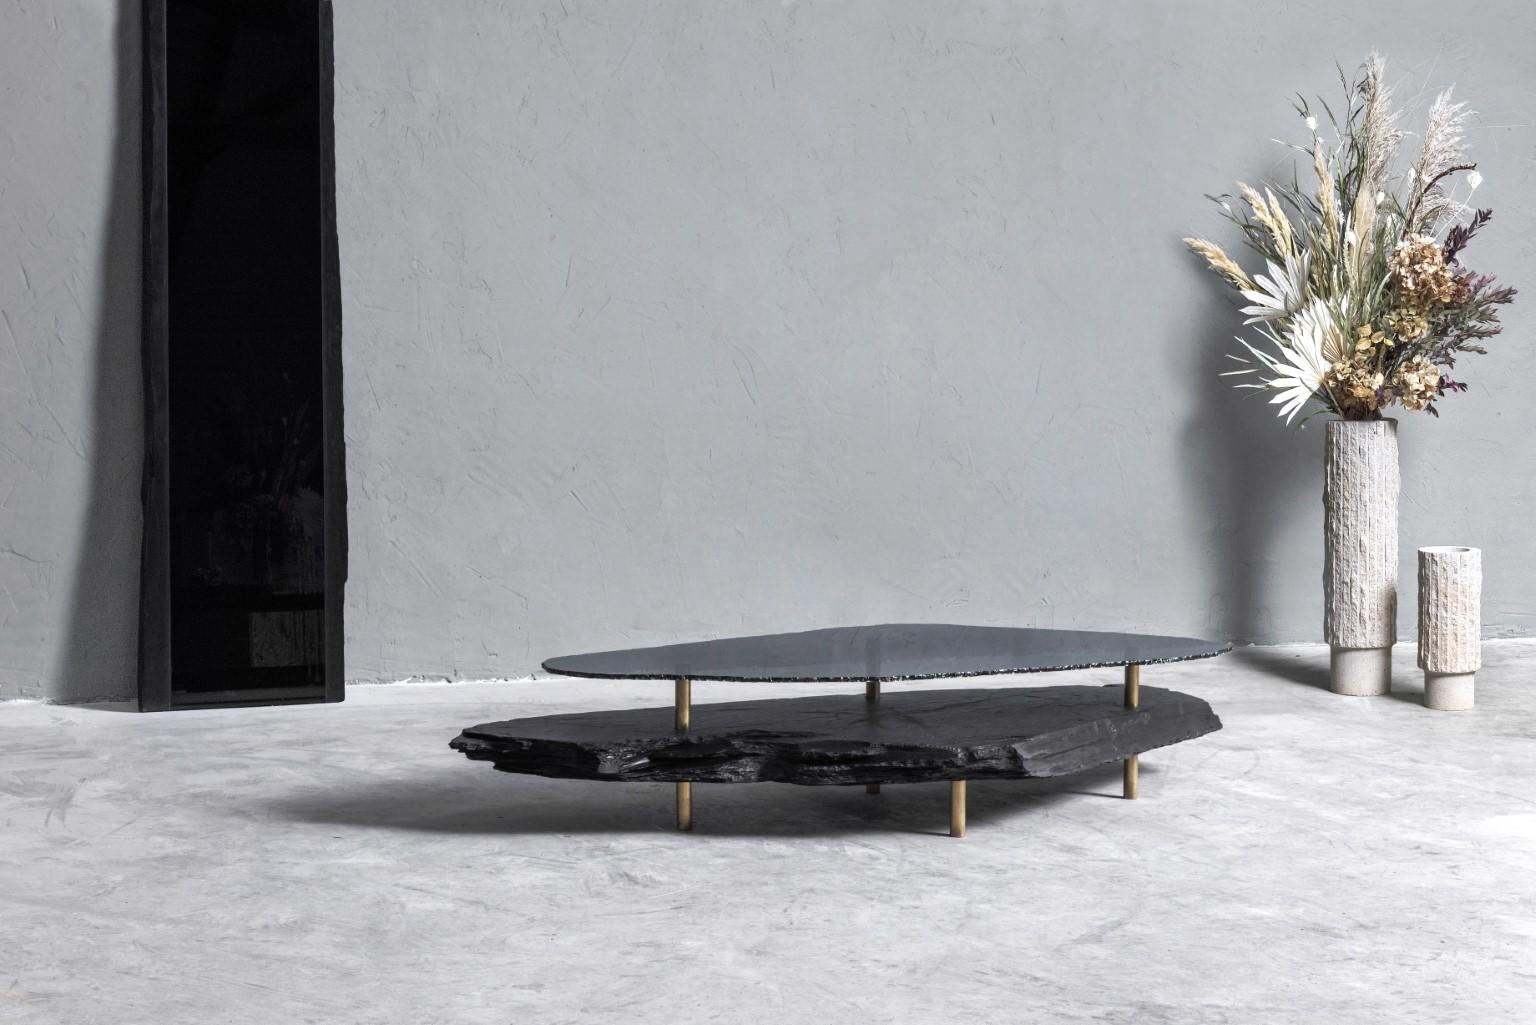 Unique slate sculpted coffee table by Frederic Saulou
Hardie 
Coffee table
Black Slate, grey smocked mirror
Measures: L 195 x W 80 x H 34 cm
Unique piece : 1 / 1 
Signed and numbered.

